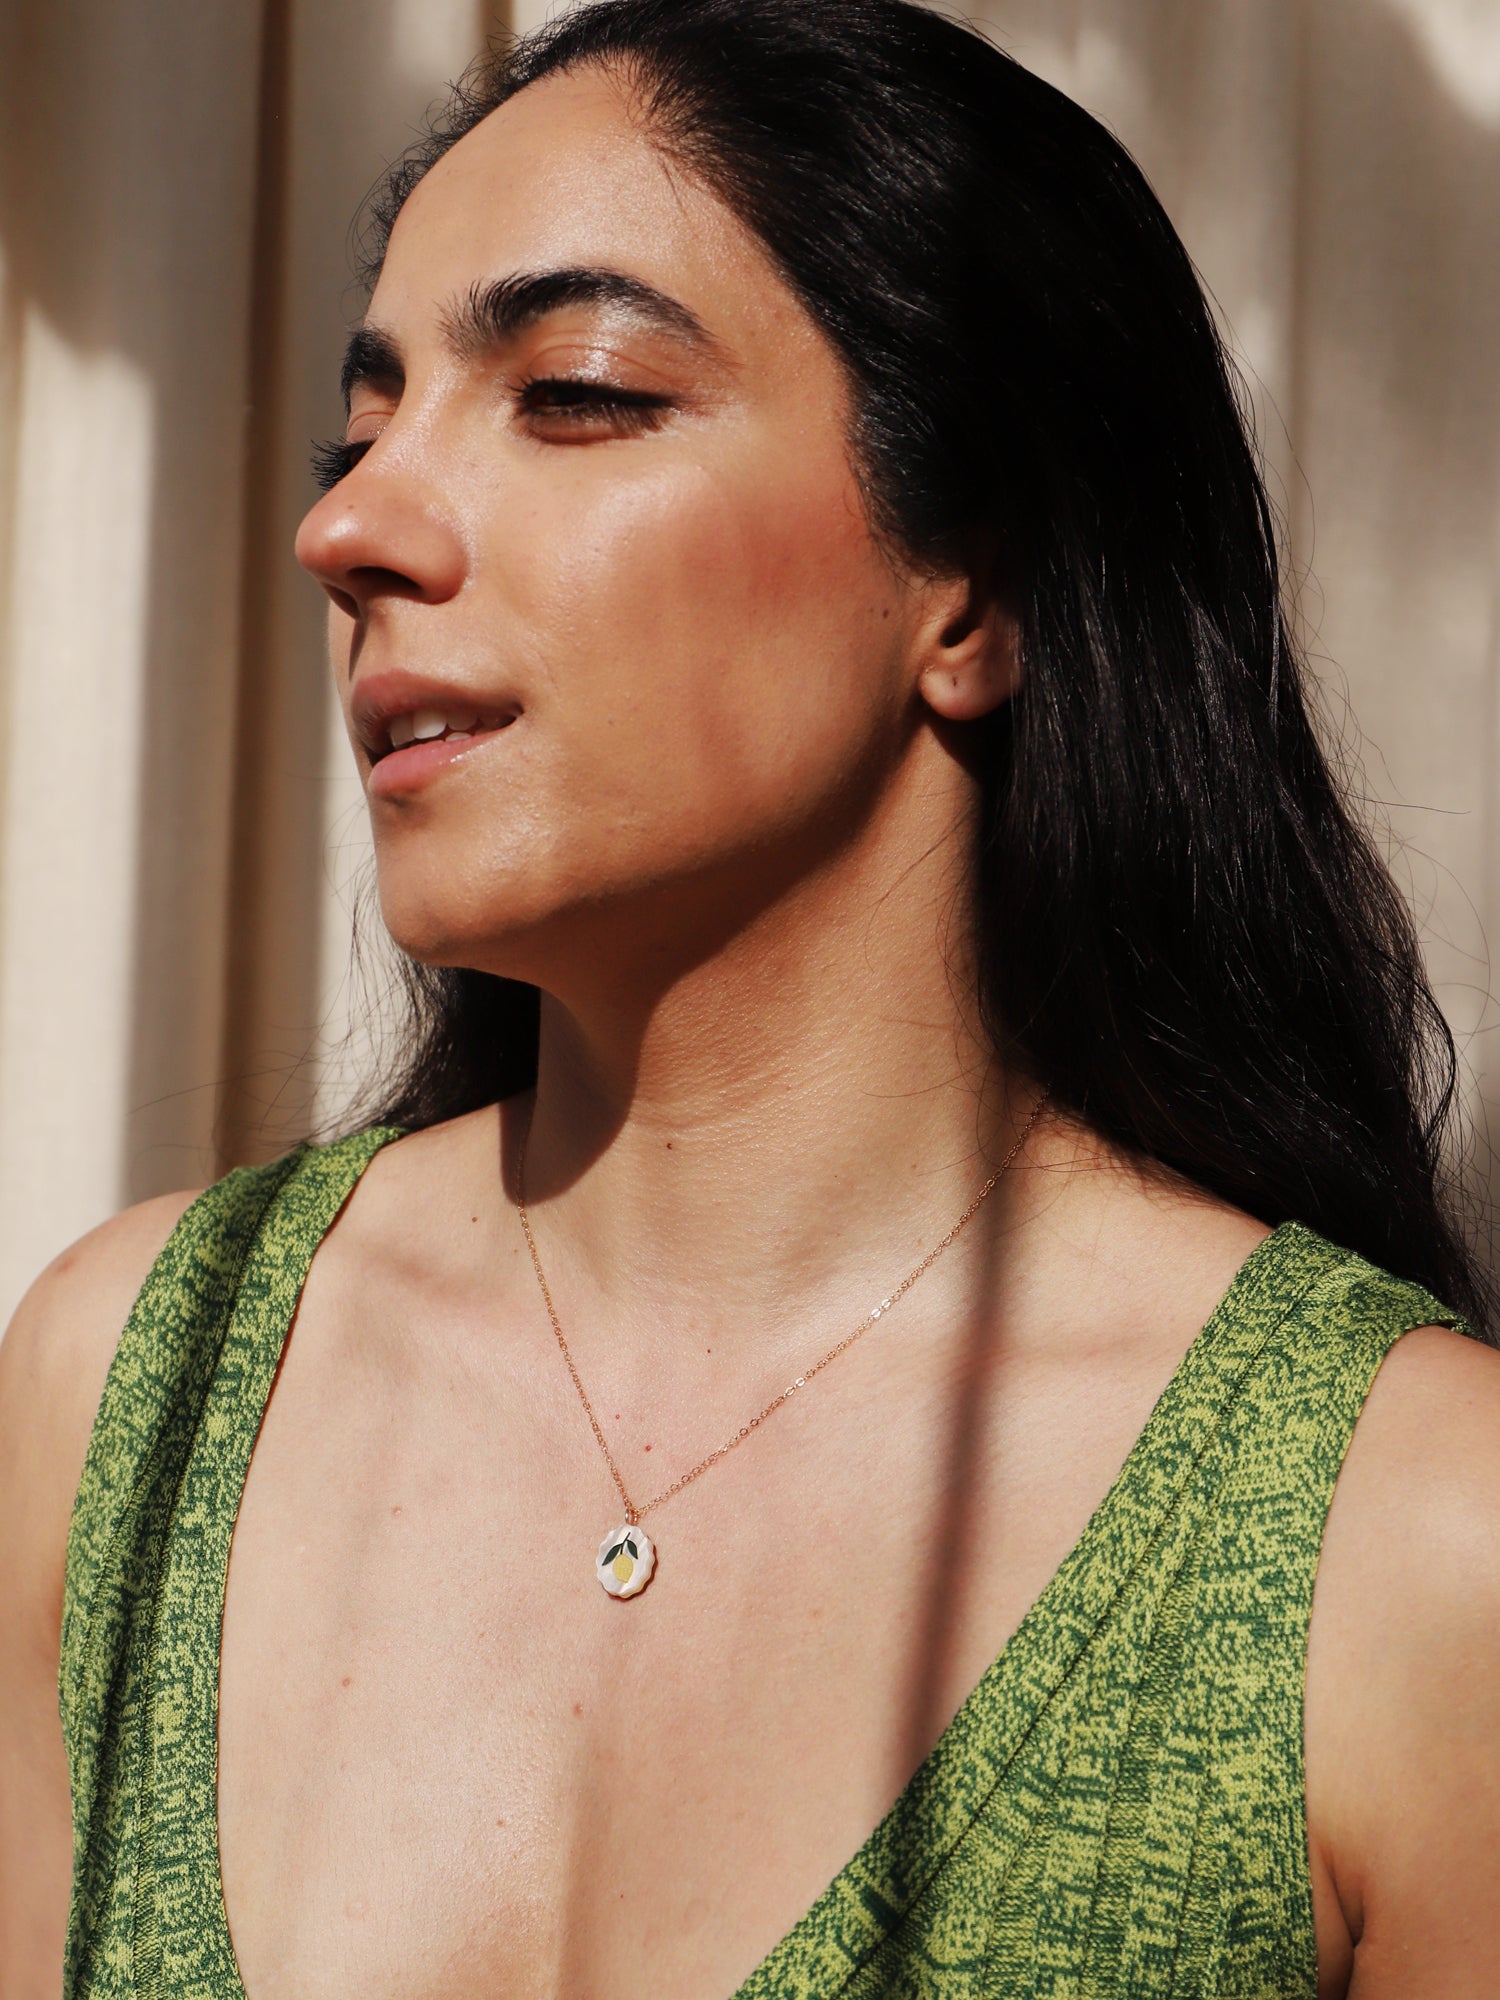 Lemon charm necklace made from acrylic and a 14k gold-filled chain & findings. Handmade in the UK by Wolf & Moon.